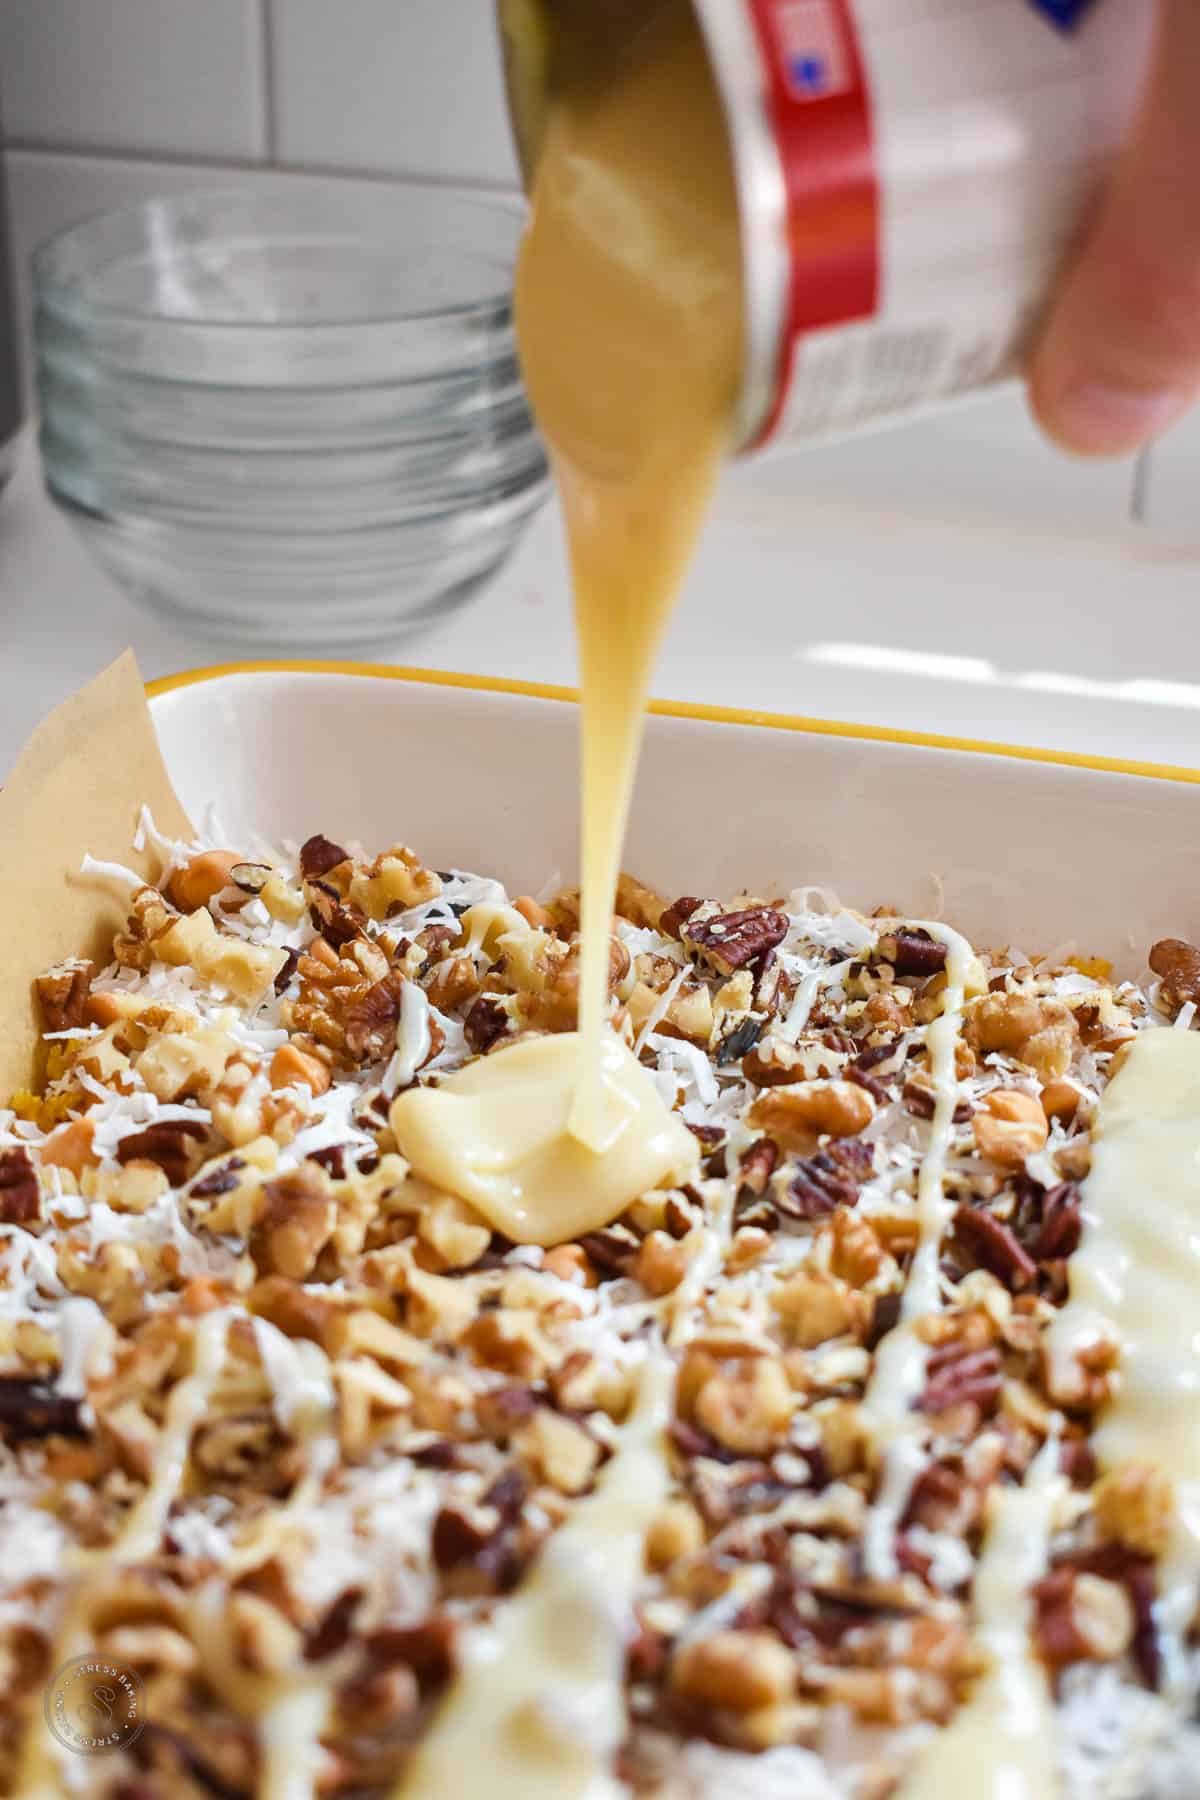 Condensed milk being poured on top of shredded coconut and chopped nuts in a baking dish